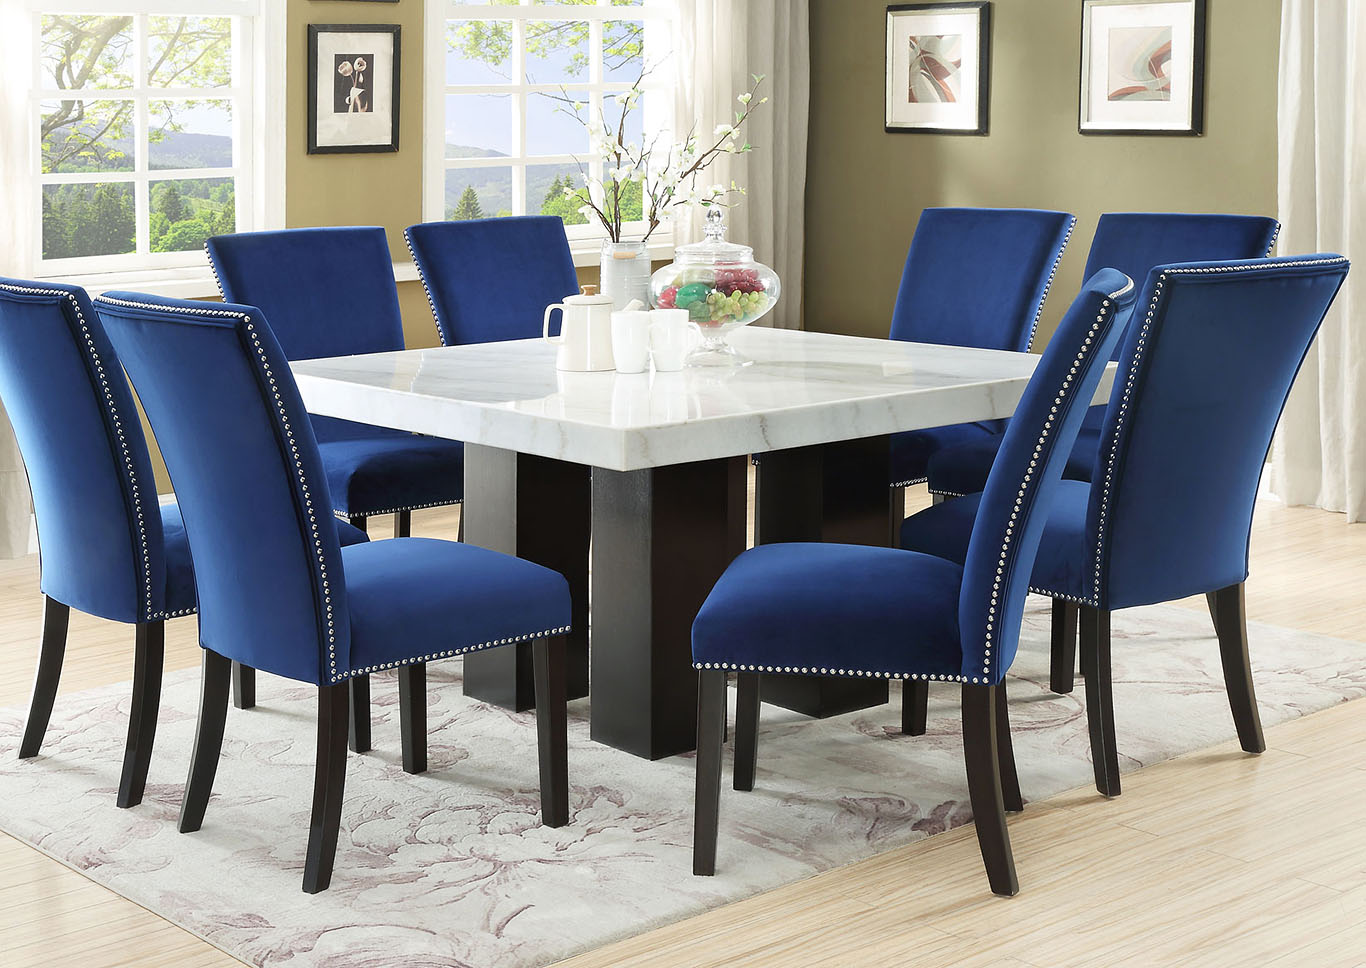 Camila Brown Square Marble Top Dining Set W 8 Chairs Blue Velvet Ivan Smith